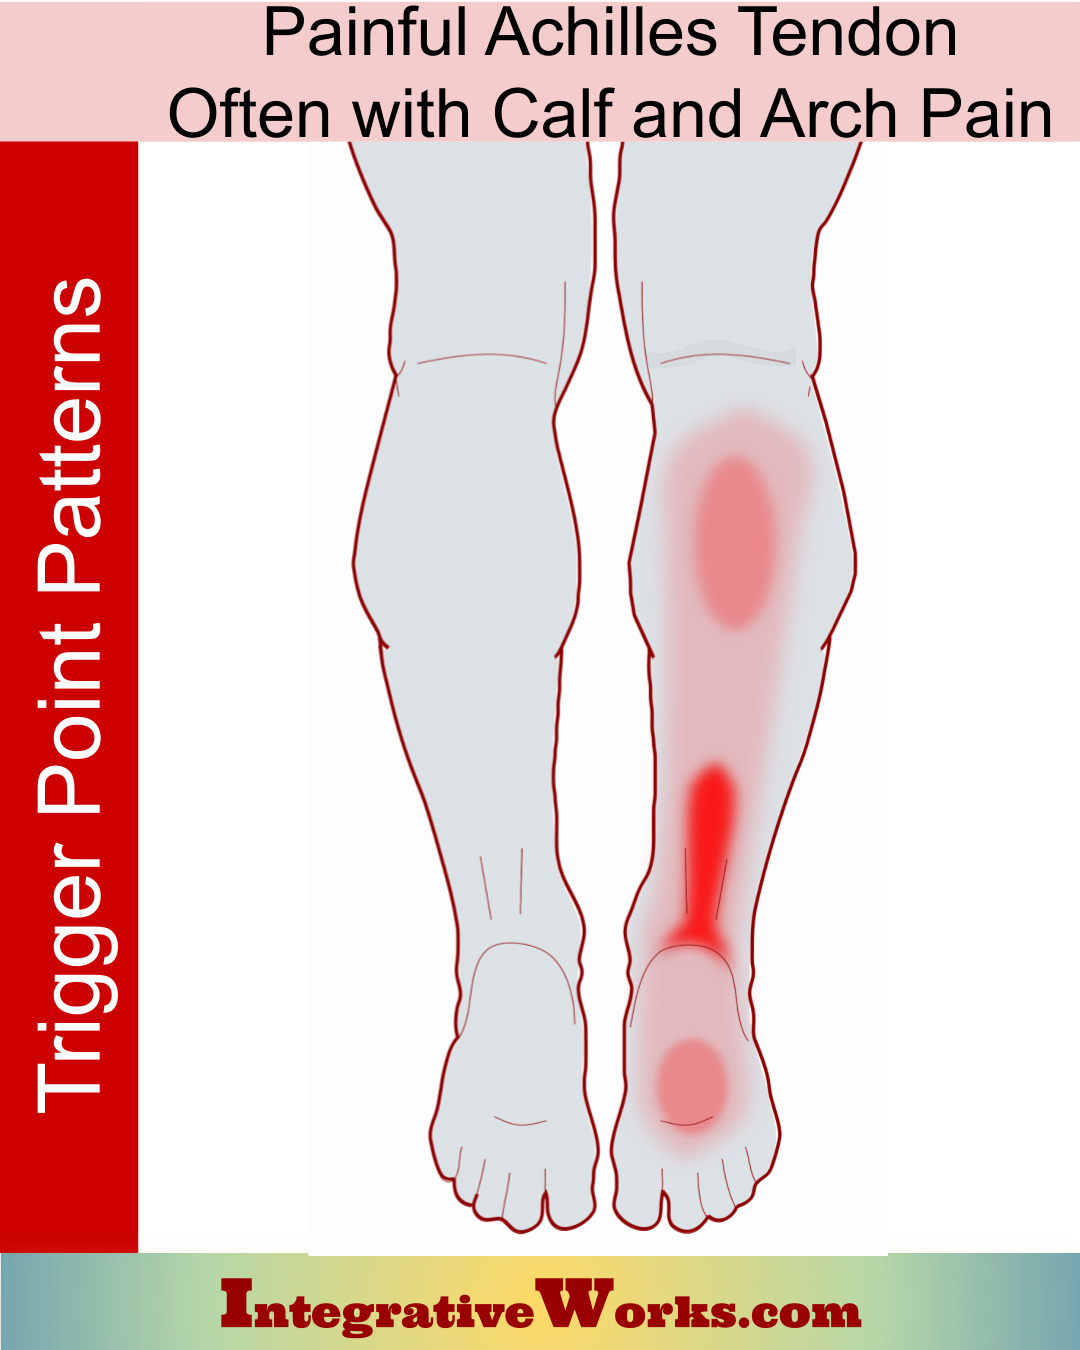 Pain in the Achilles Tendon